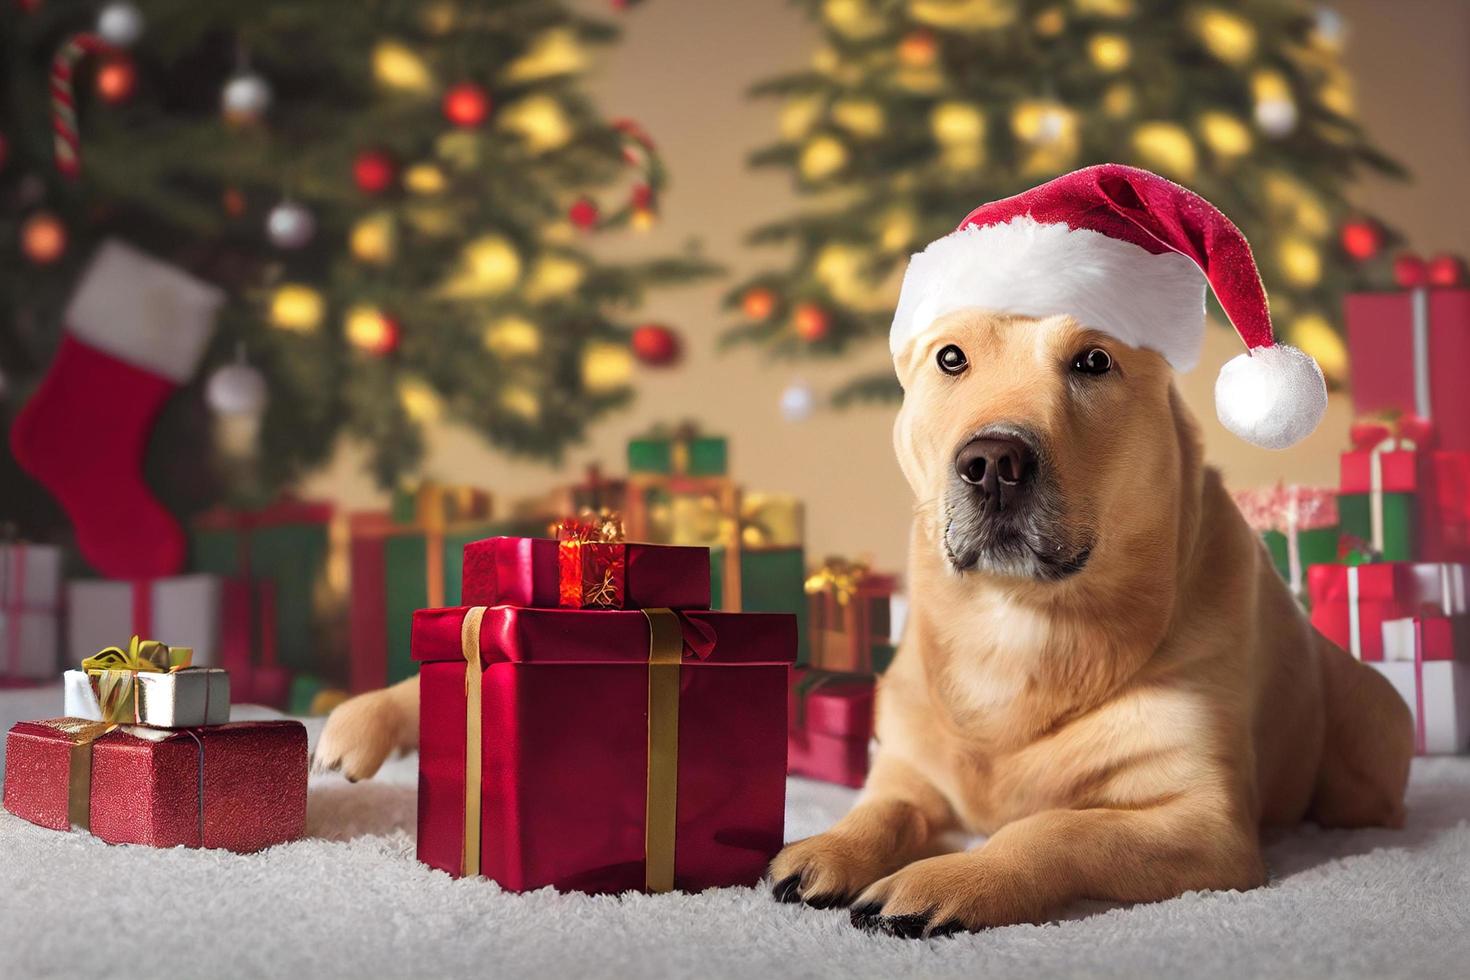 Cute cocker golden retriever dog wearing Santa's hat in a Christmas room with gift boxes photo